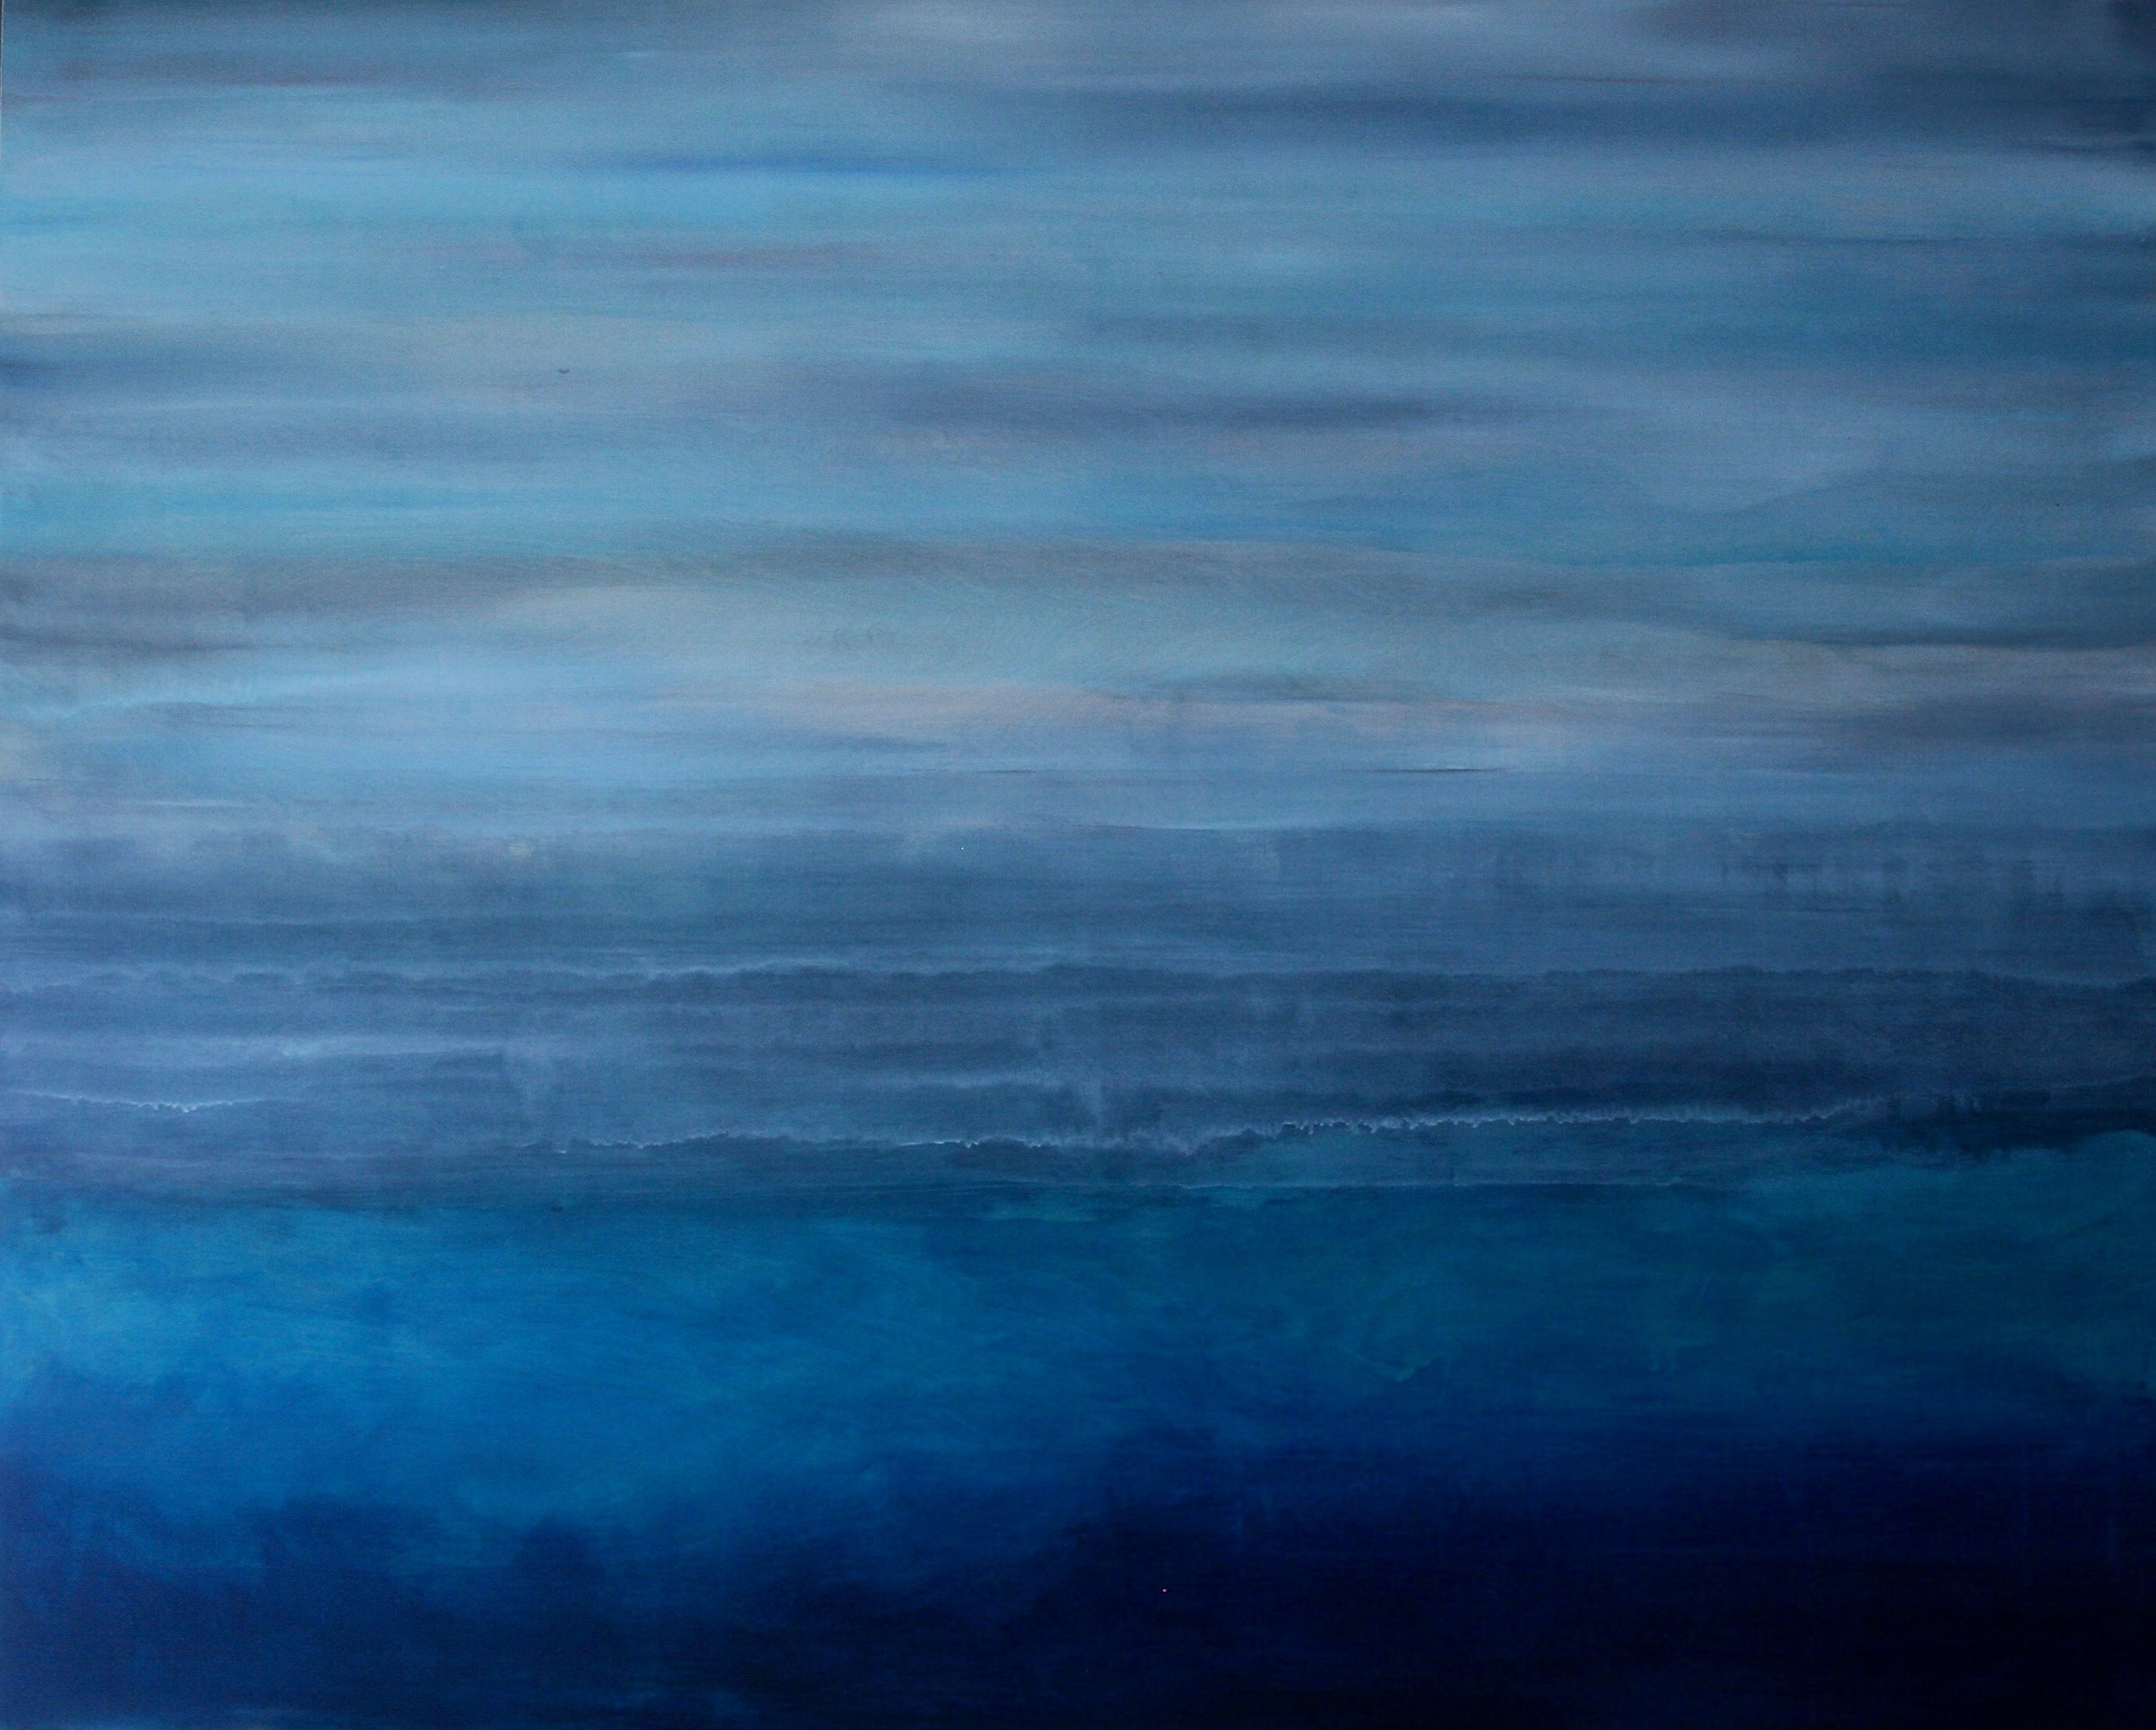 Sea Winds, 48 (h) x 60 (w) x 1.5 (d) inches, acrylic on wood panel